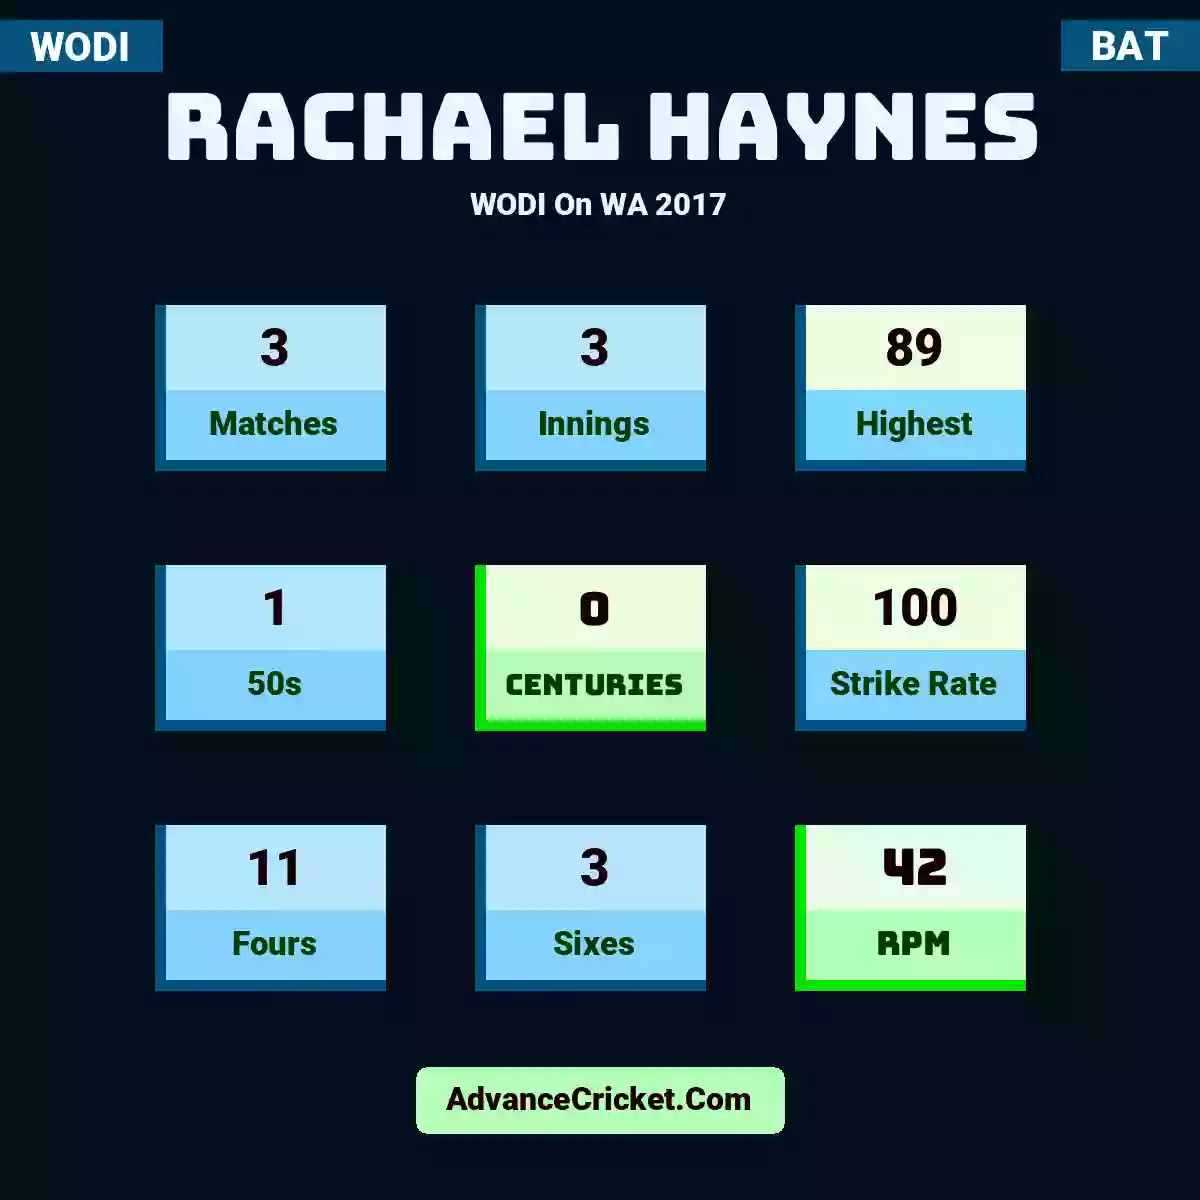 Rachael Haynes WODI  On WA 2017, Rachael Haynes played 3 matches, scored 89 runs as highest, 1 half-centuries, and 0 centuries, with a strike rate of 100. R.Haynes hit 11 fours and 3 sixes, with an RPM of 42.